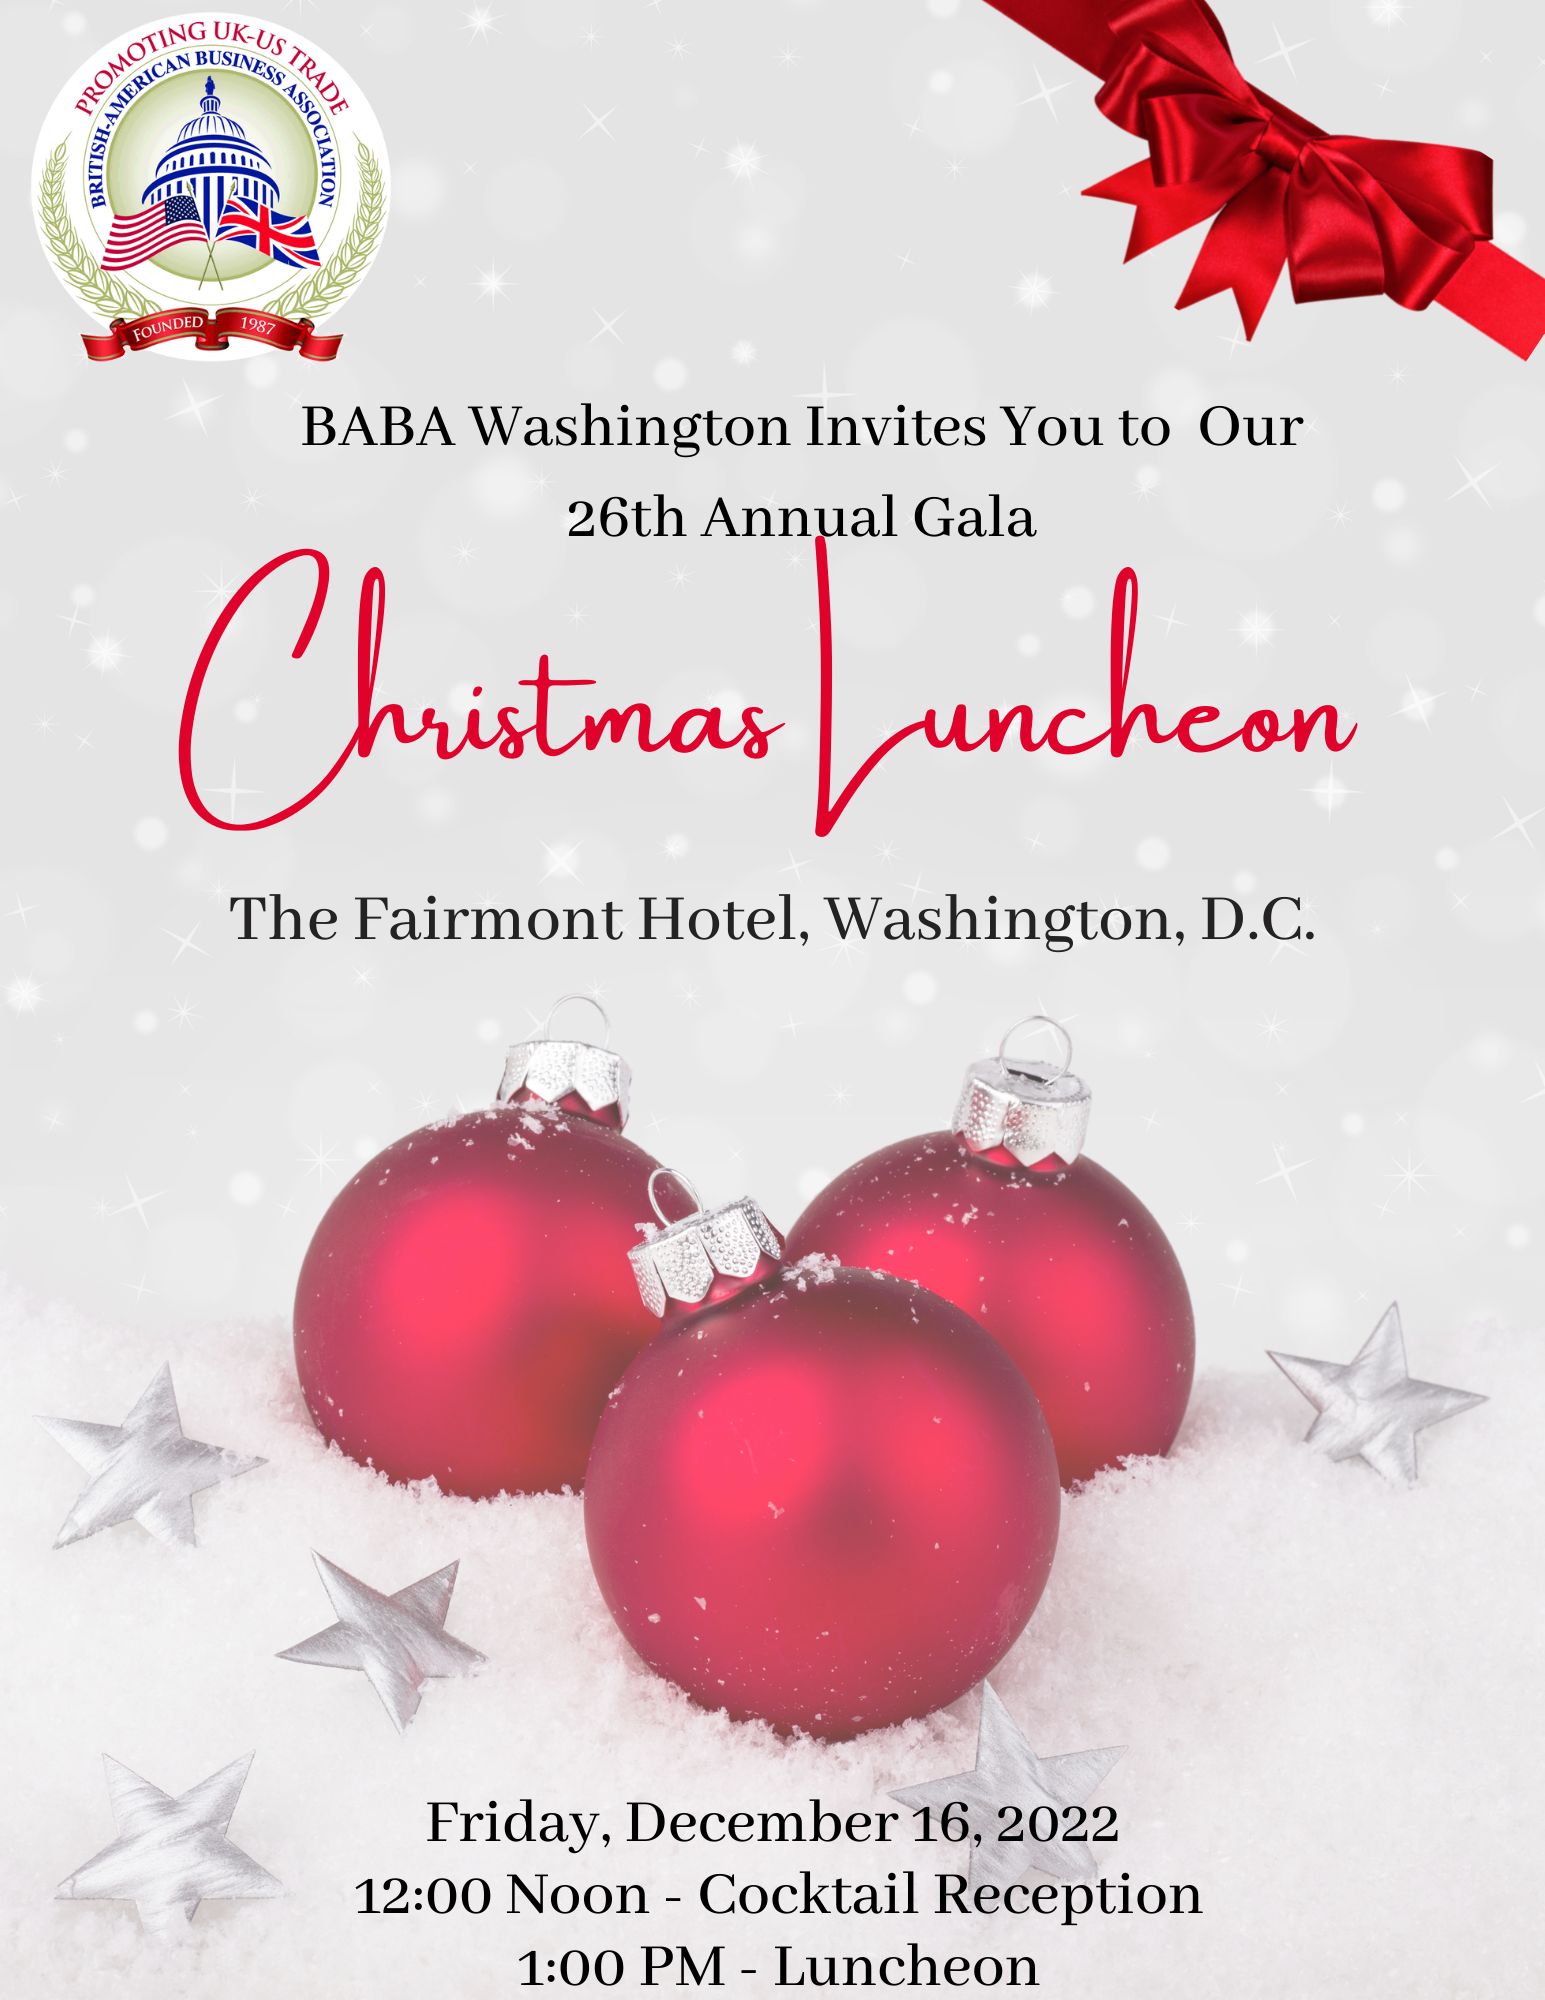 SAVE THE DATE! 26th Annual Gala Christmas Luncheon